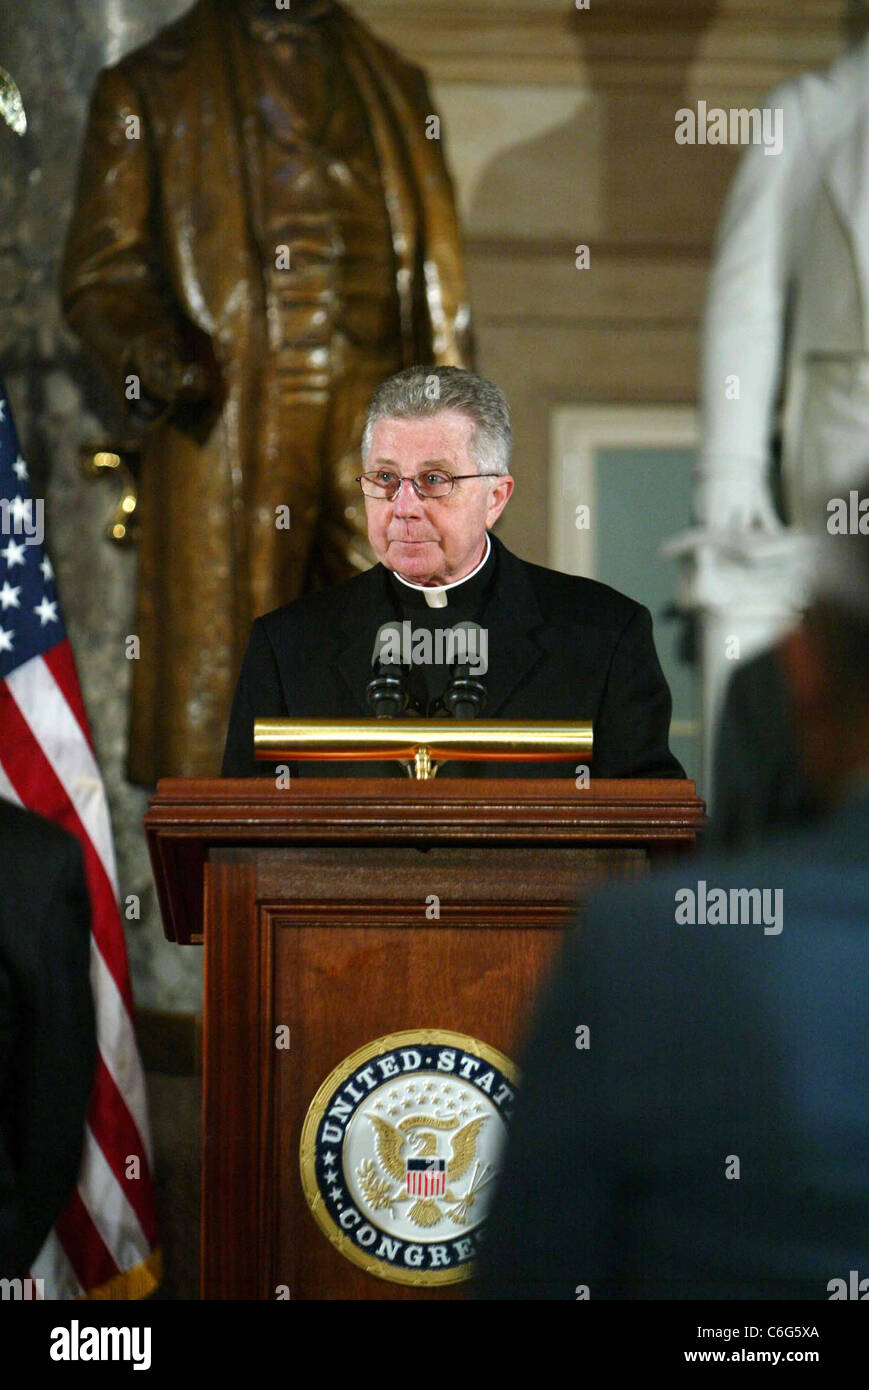 Reverend Daniel Coughlin Chaplain of the United States House of Representatives attends a memorial service for the late Stock Photo